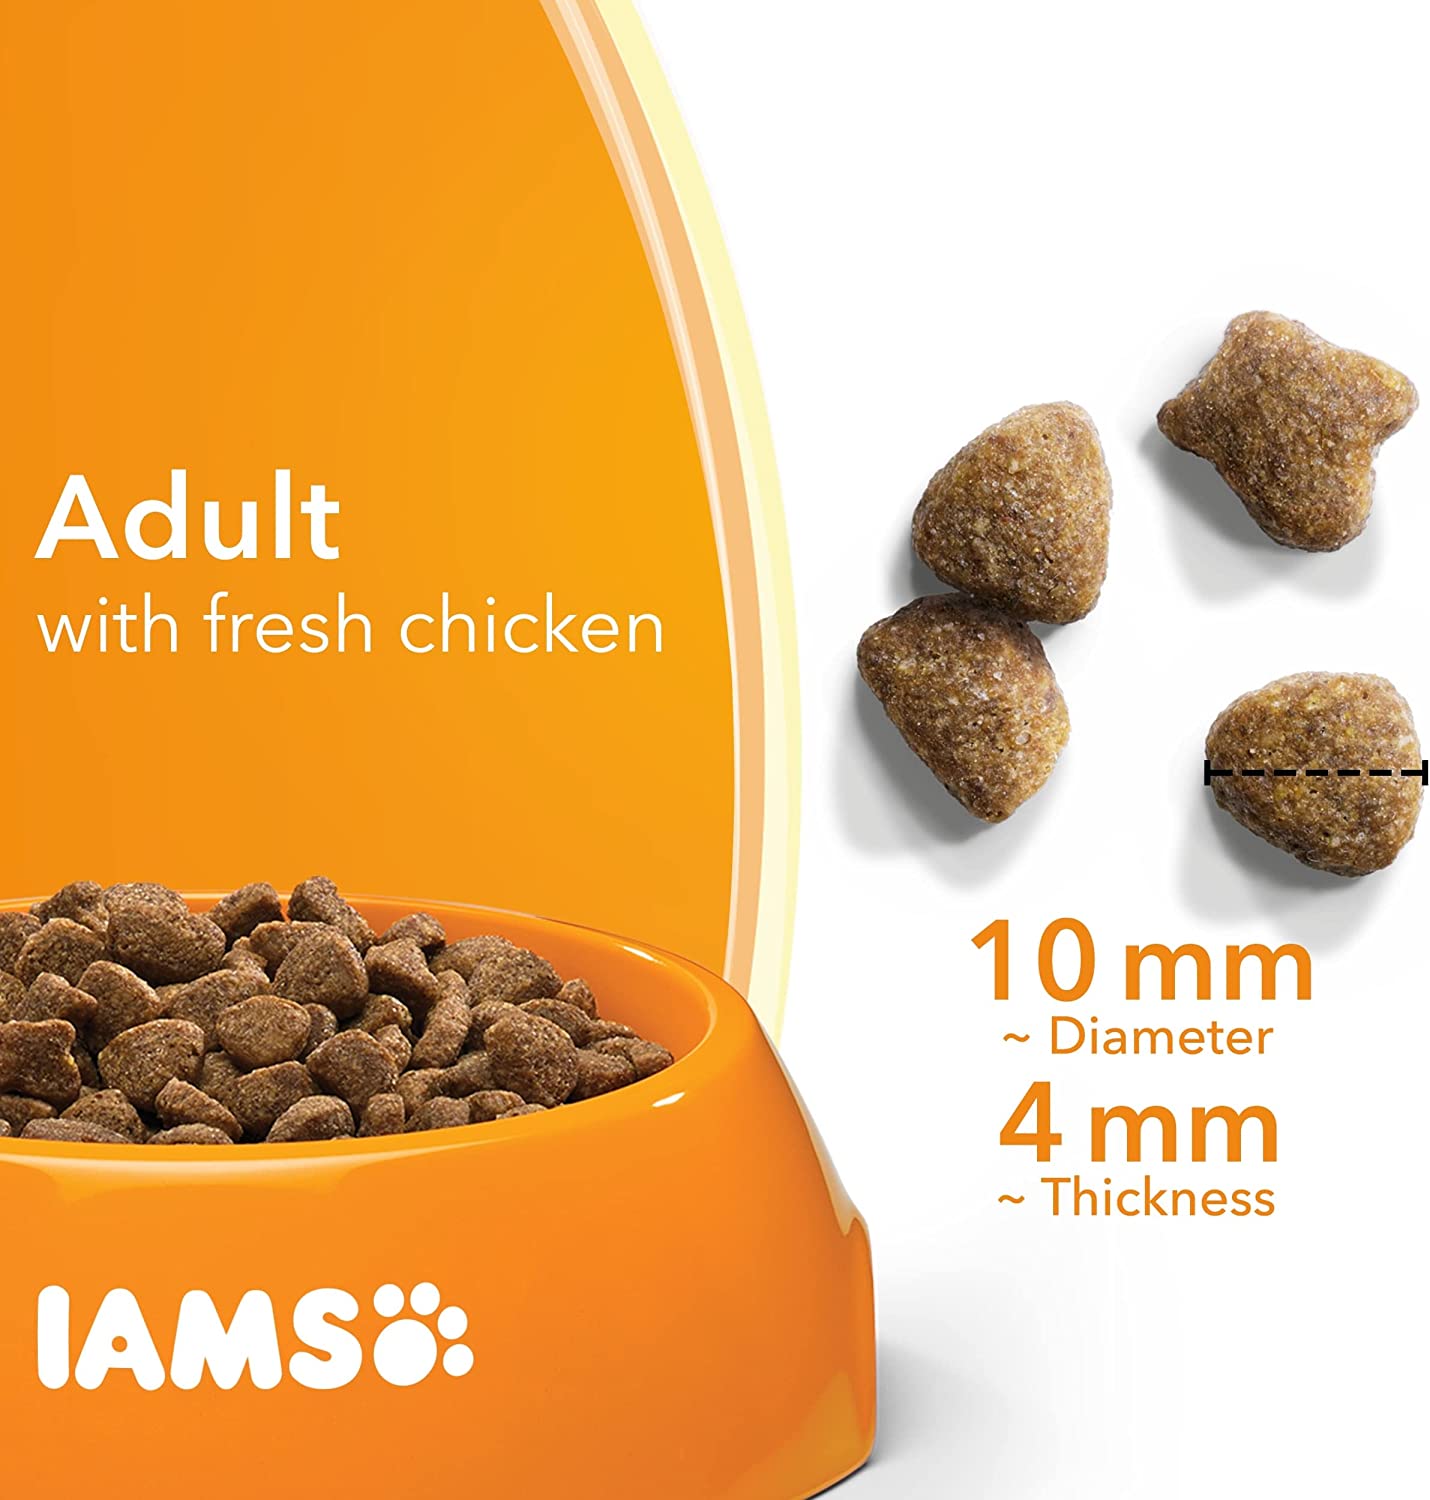 IAMS for Vitality Adult Cat Food Fresh Chicken 800g